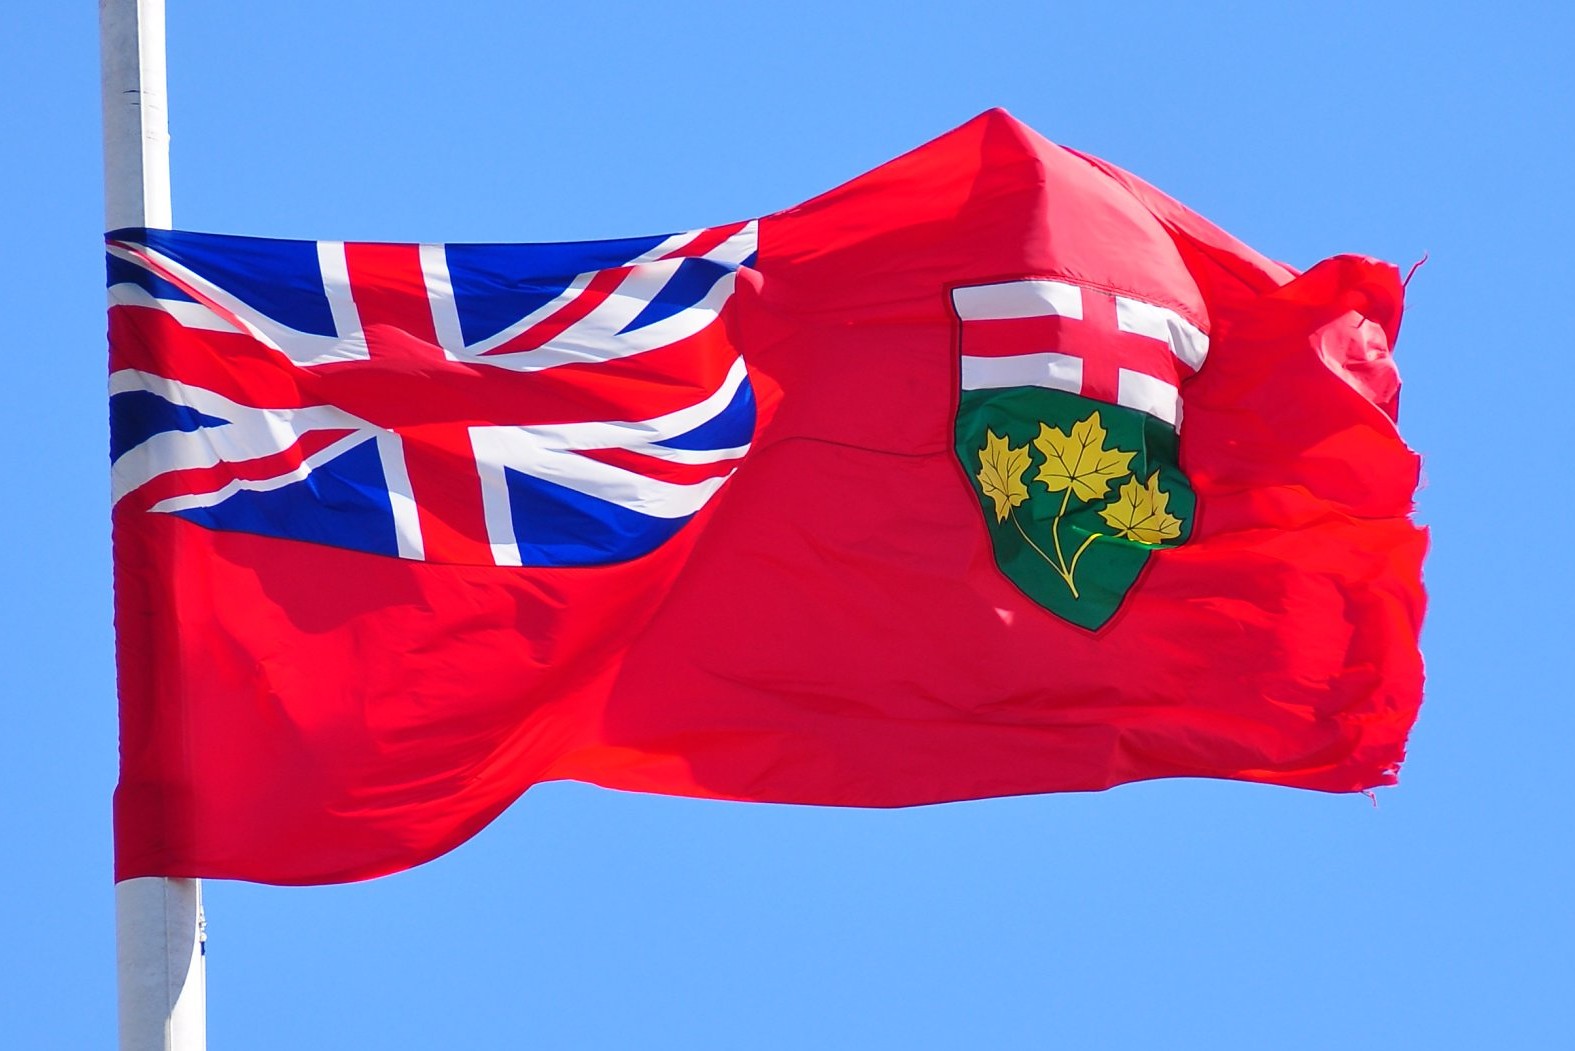 Ontario Gambling Tax - Image Credit - Drapeau de l'Ontario - Ontario flag by abdallahh is licensed under CC BY 2.0. - MGJ